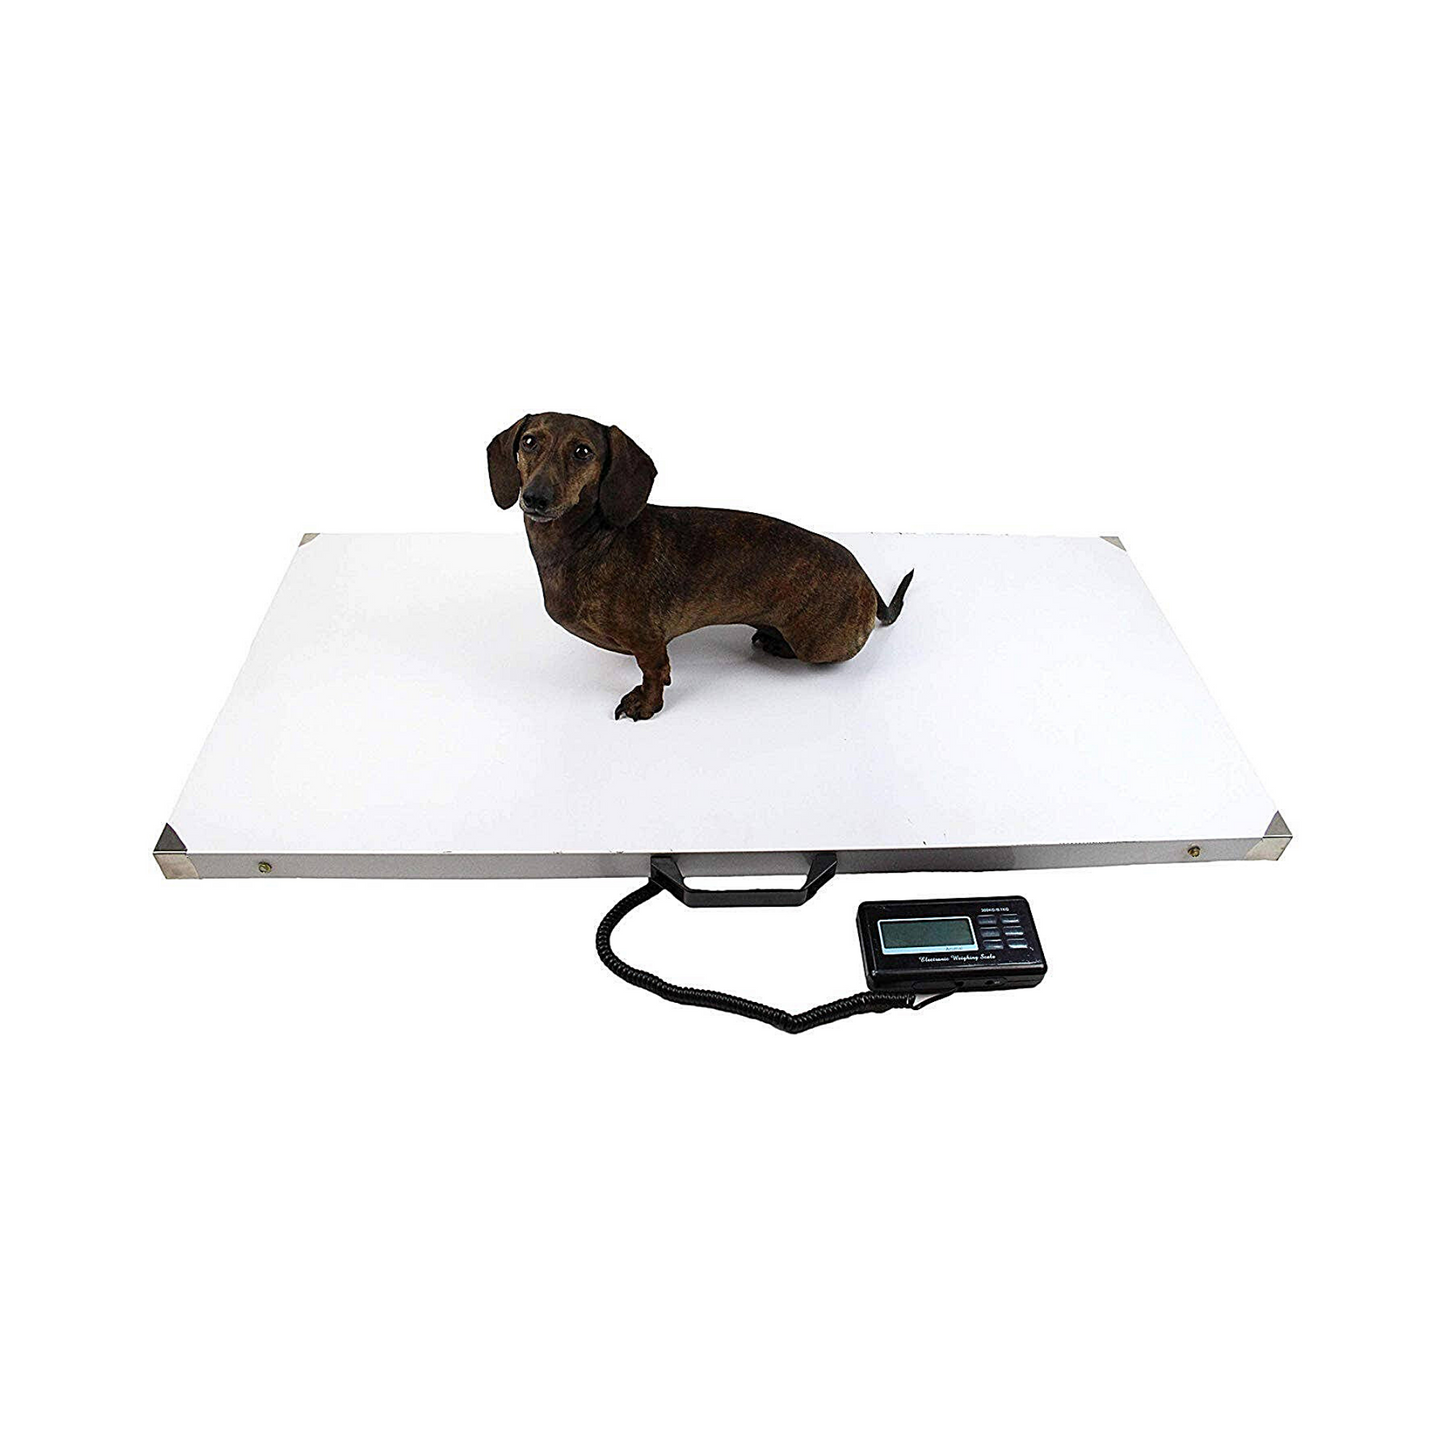 Midlee Dog Stainless Steel Pet Scale 43"x20", 660lb limit